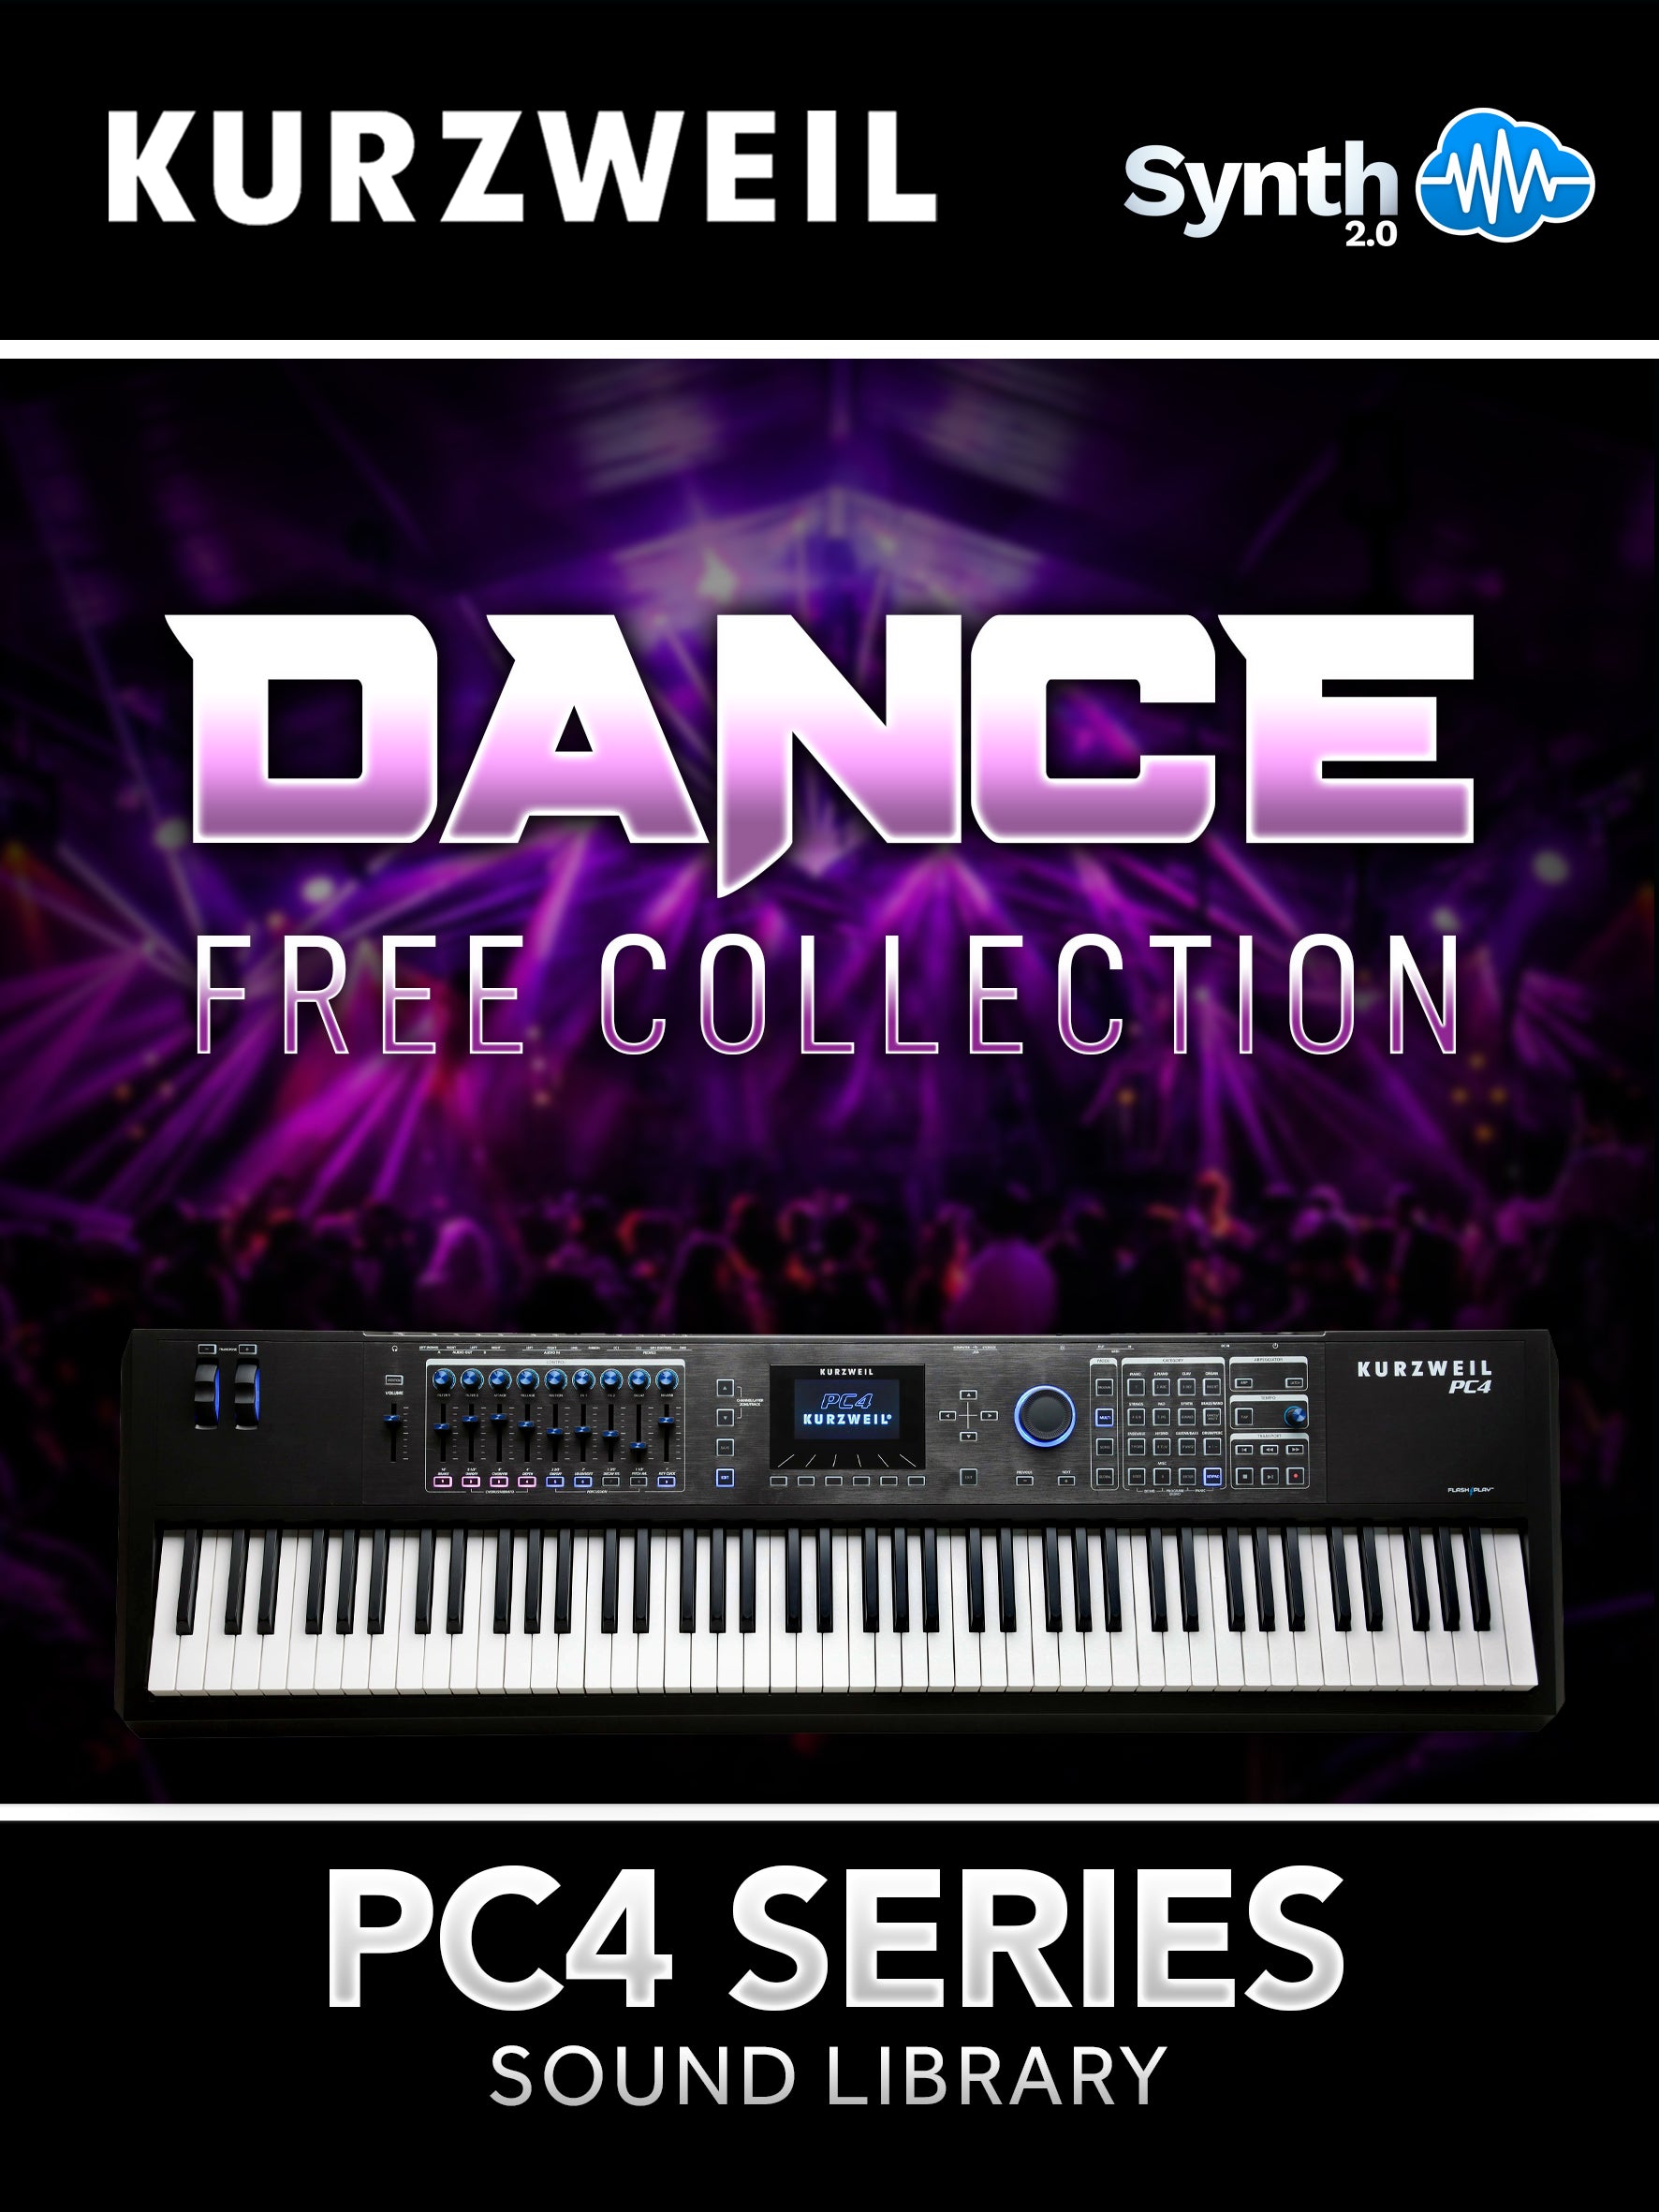 PC4027 - Dance Collection - Kurzweil PC4 Series ( Free ) ( 10 presets )